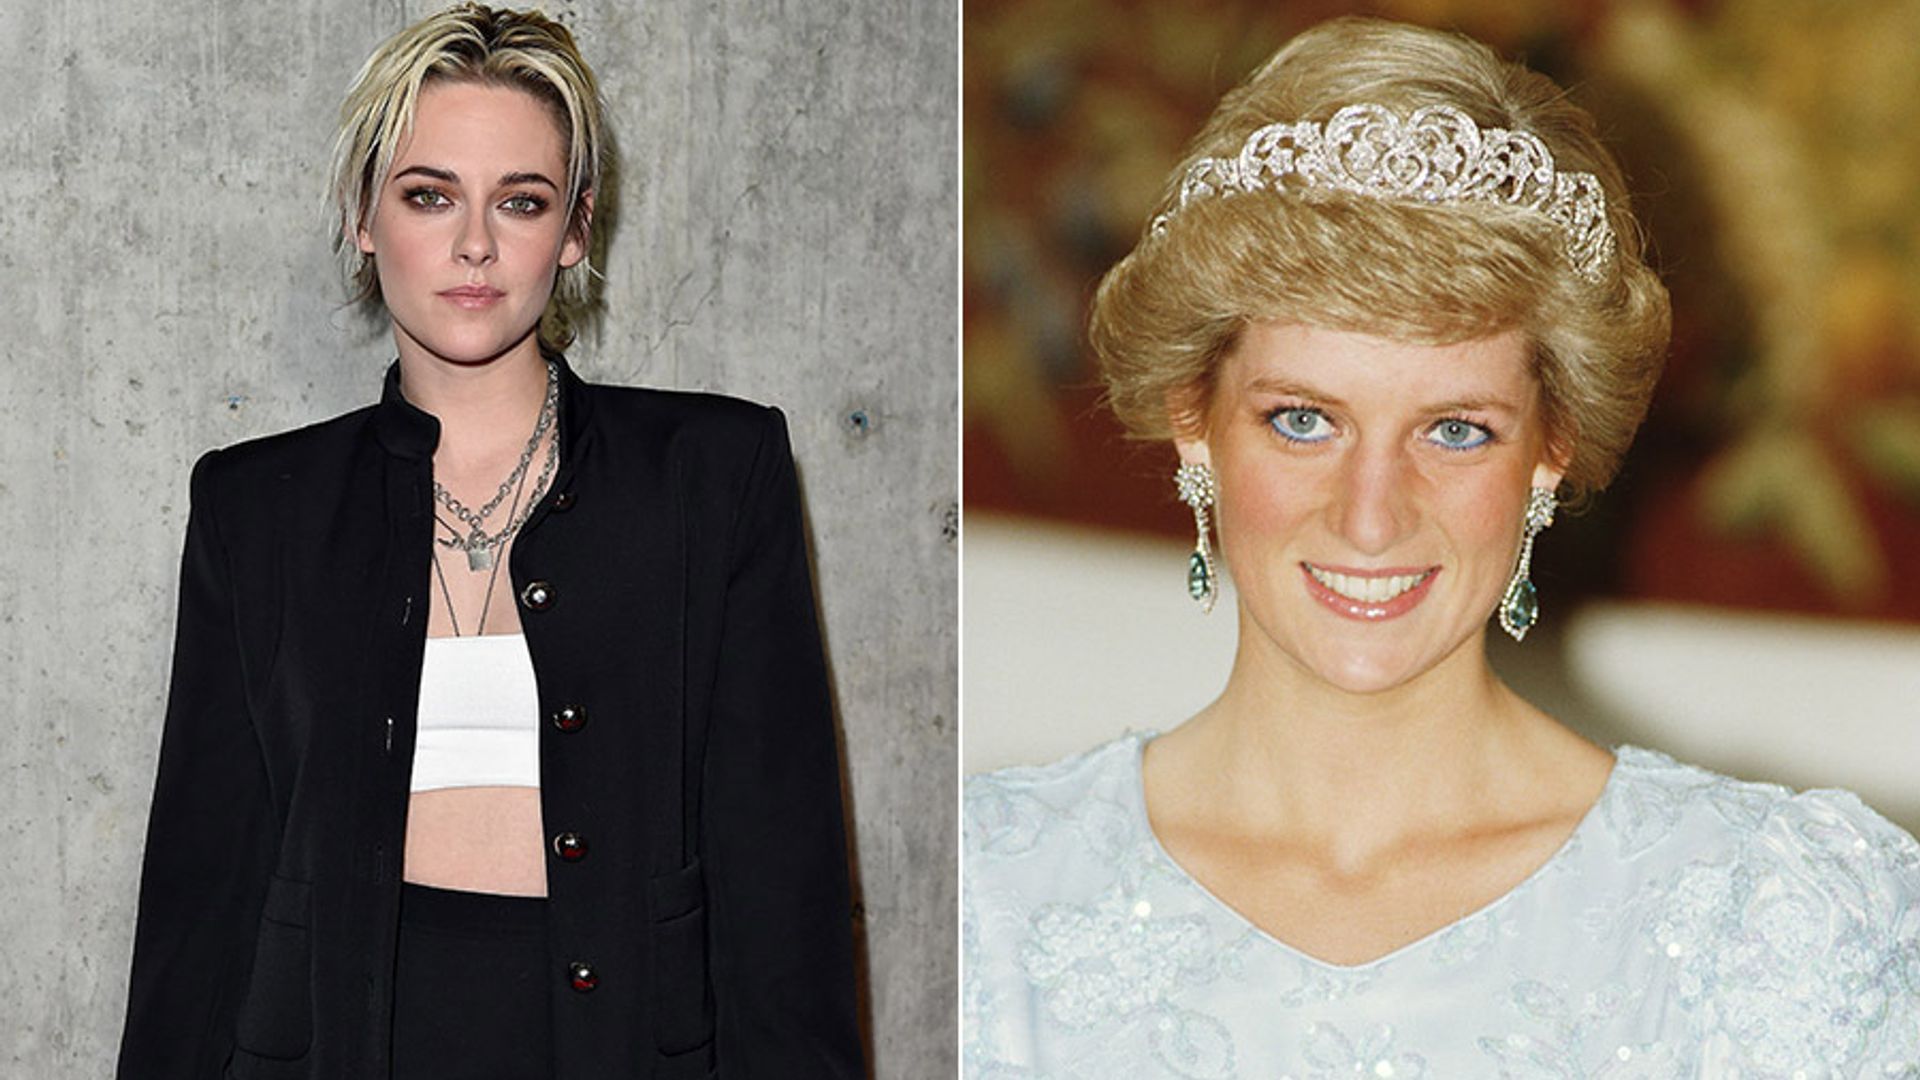 Kristen Stewart says playing Princess Diana is hard because the accent is 'intimidating'